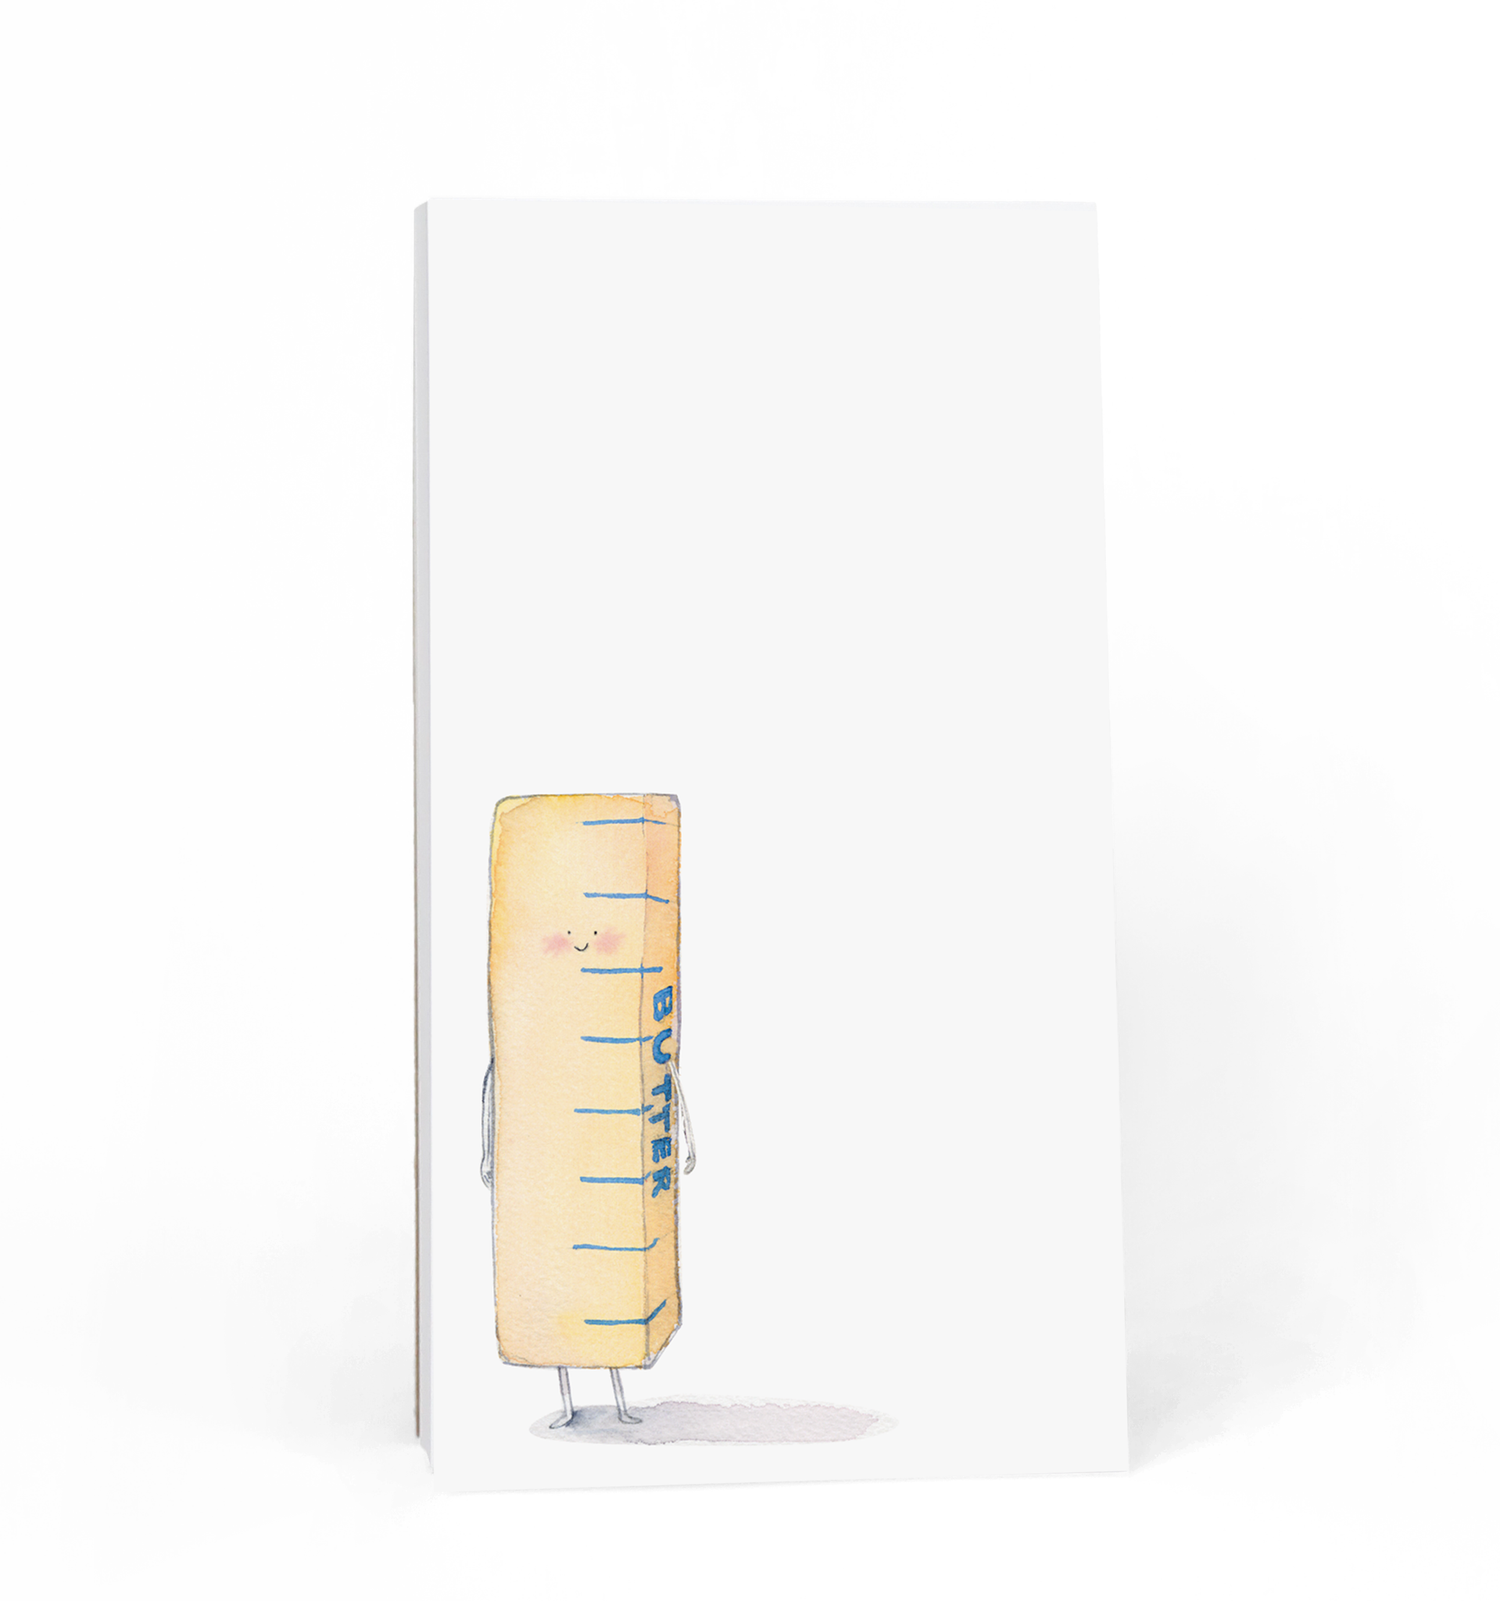 White Butter Up Notepad with an illustration of a bandaged finger on the cover by E. Frances.